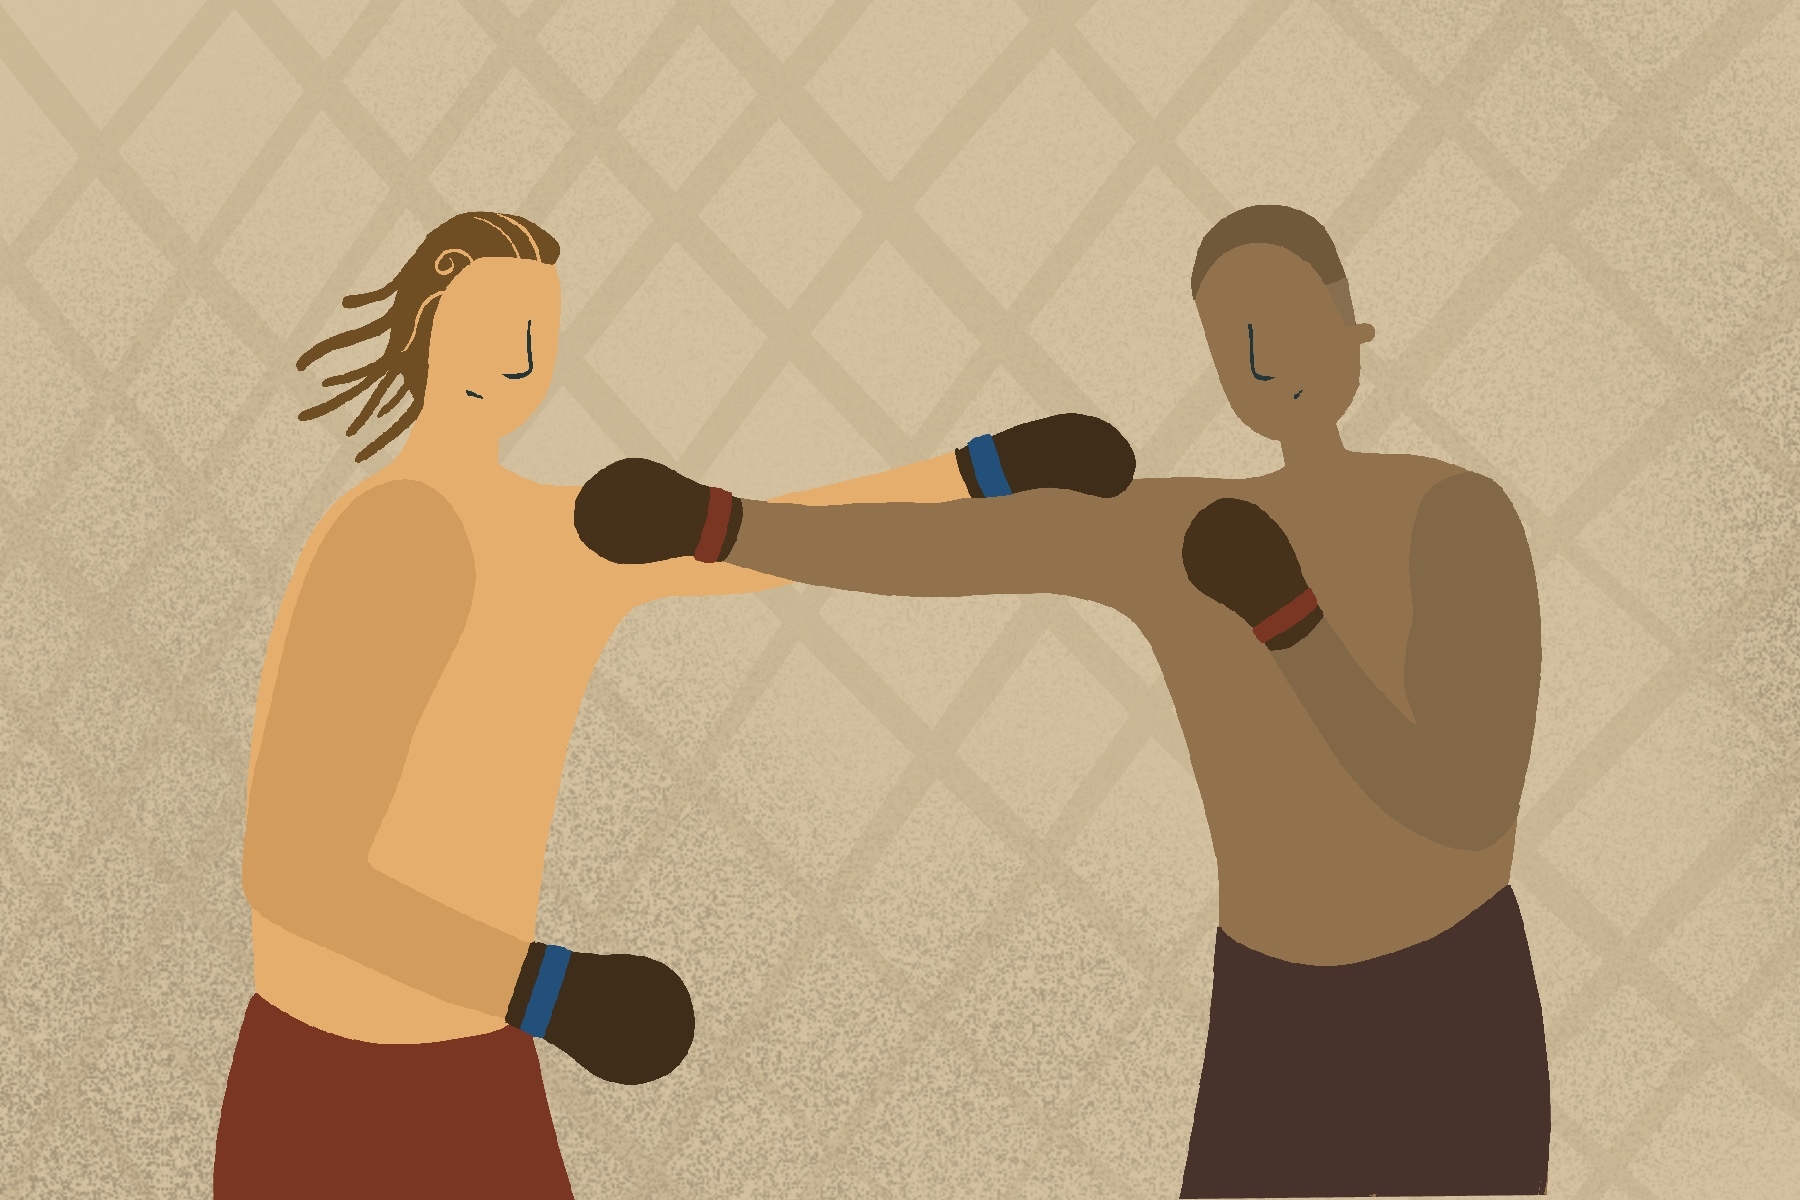 illustration of ufc fighters kamaru usman and jorge masvidal in the ring